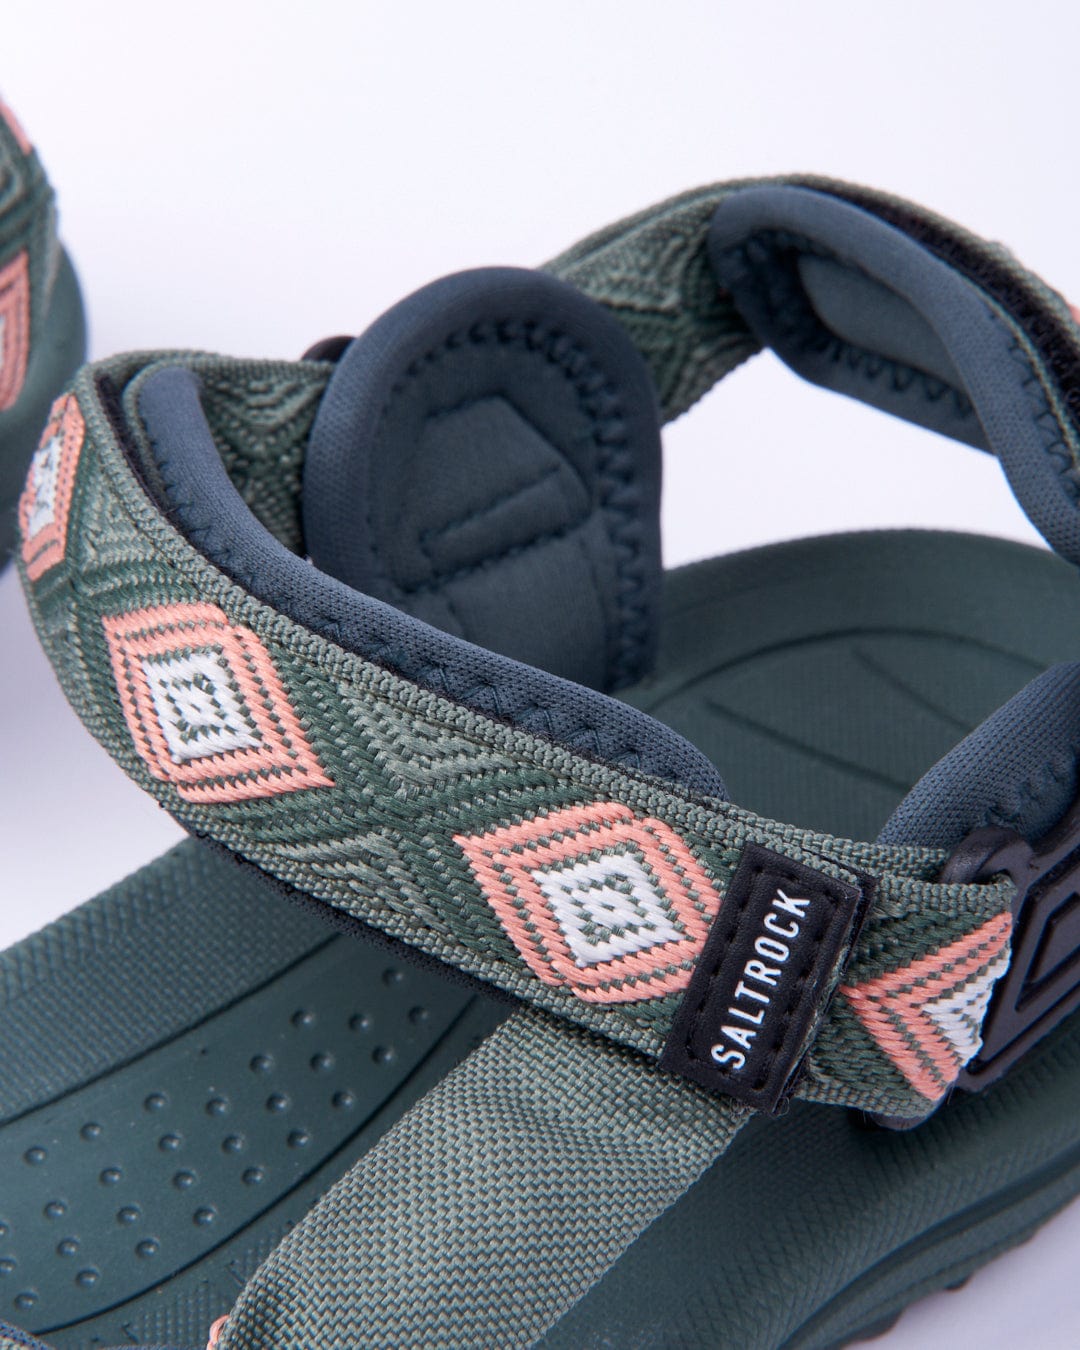 Close-up of a Saltrock green and black Trail Women's Sandal with geometric straps and a label displaying the brand "Saltrock.